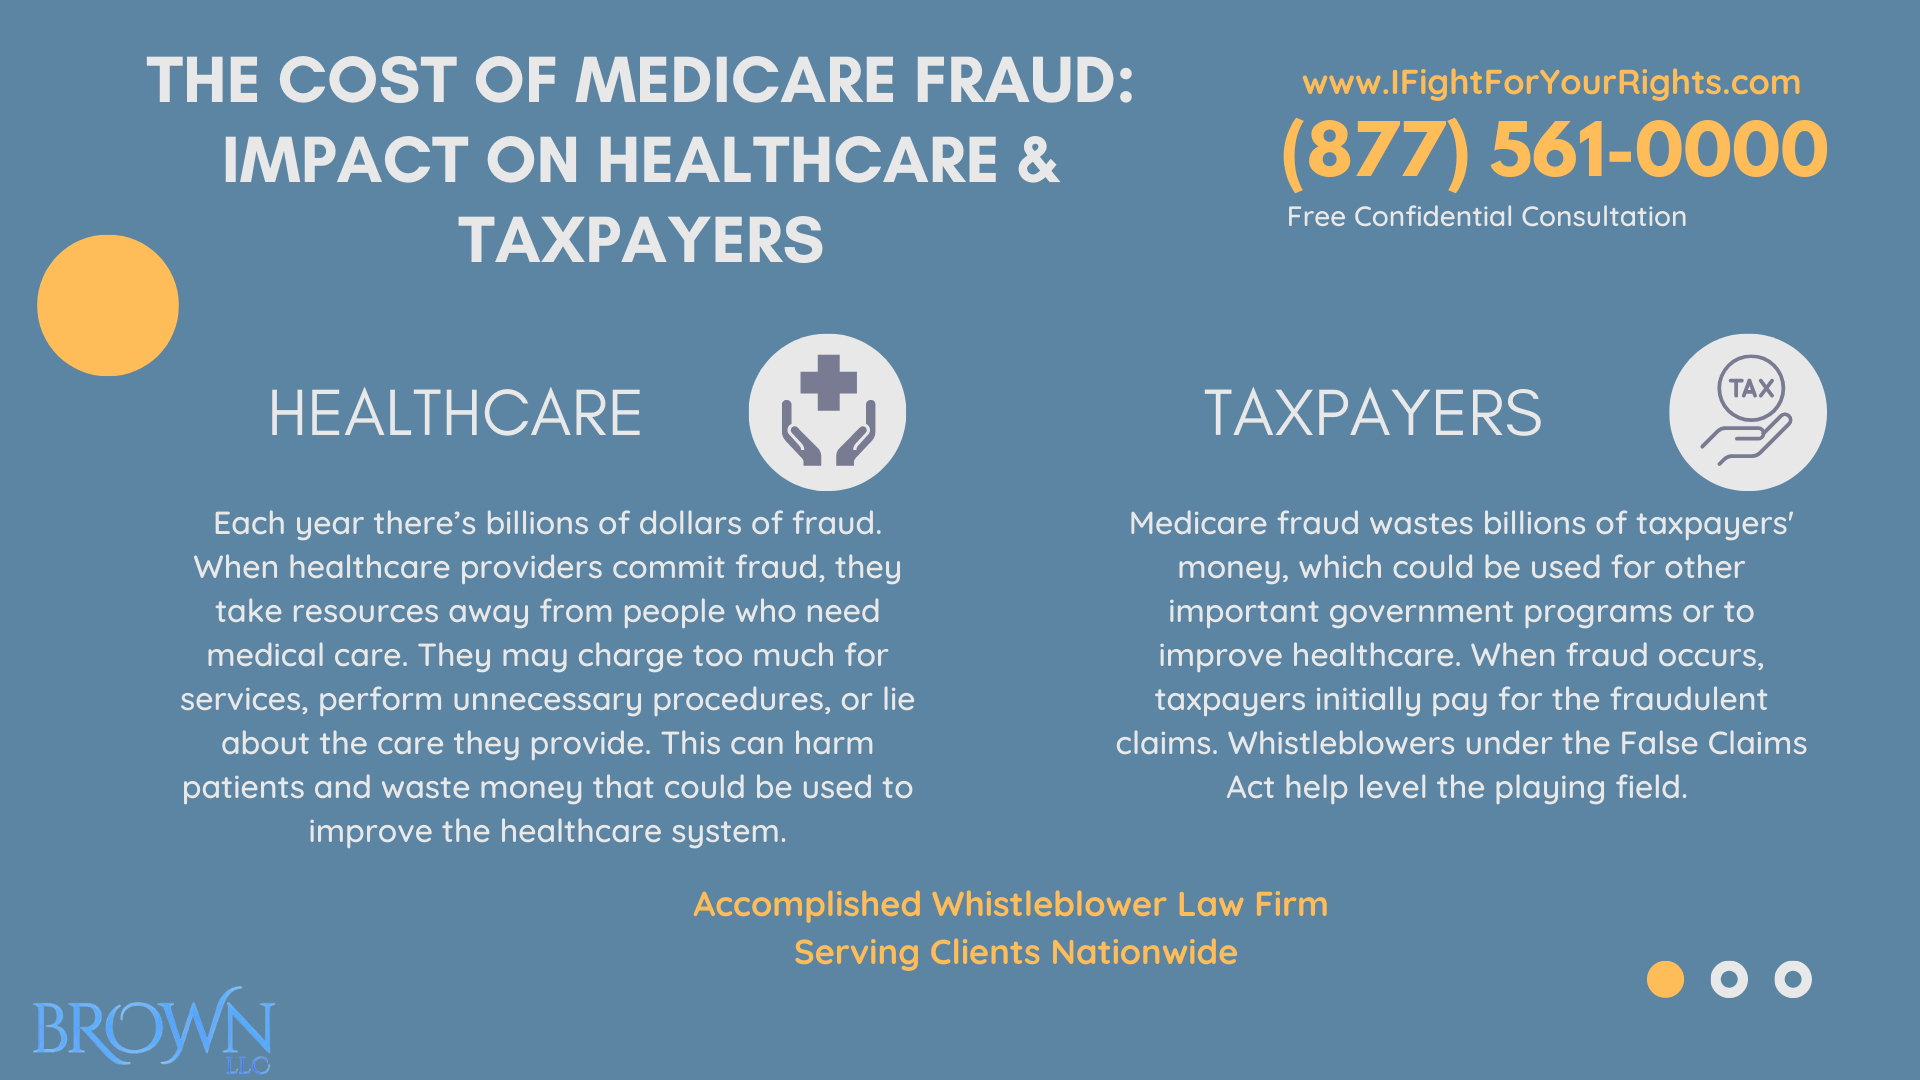 Medicare Fraud Cost and It's Impact on Healthcare and Taxpayers